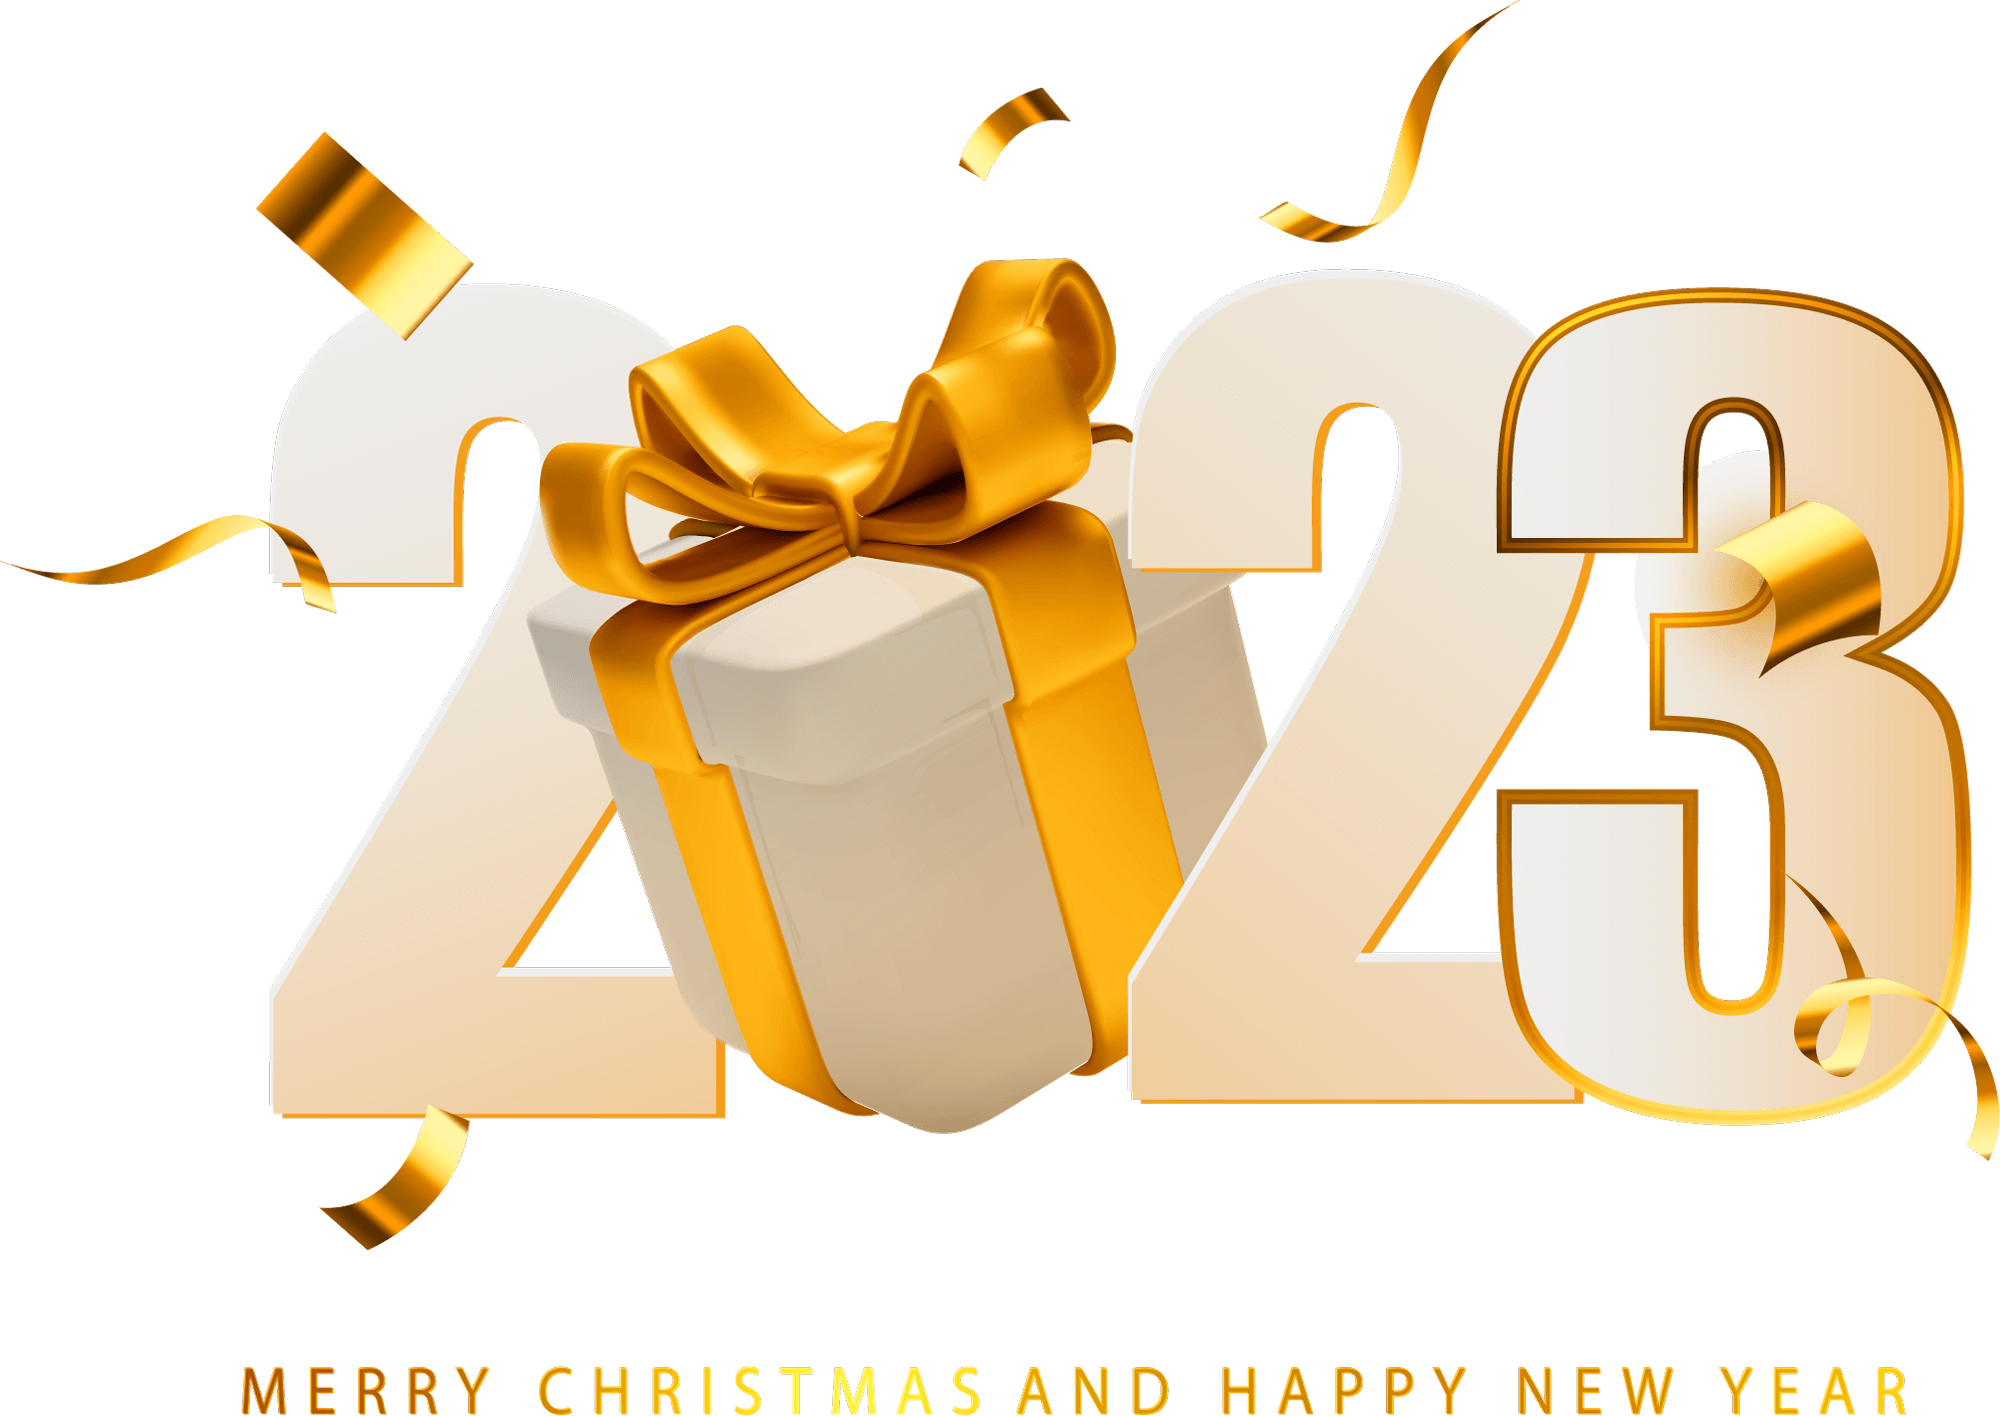 Merry Christmas And Happy New Year 2023 Text Png - Pngfreepic